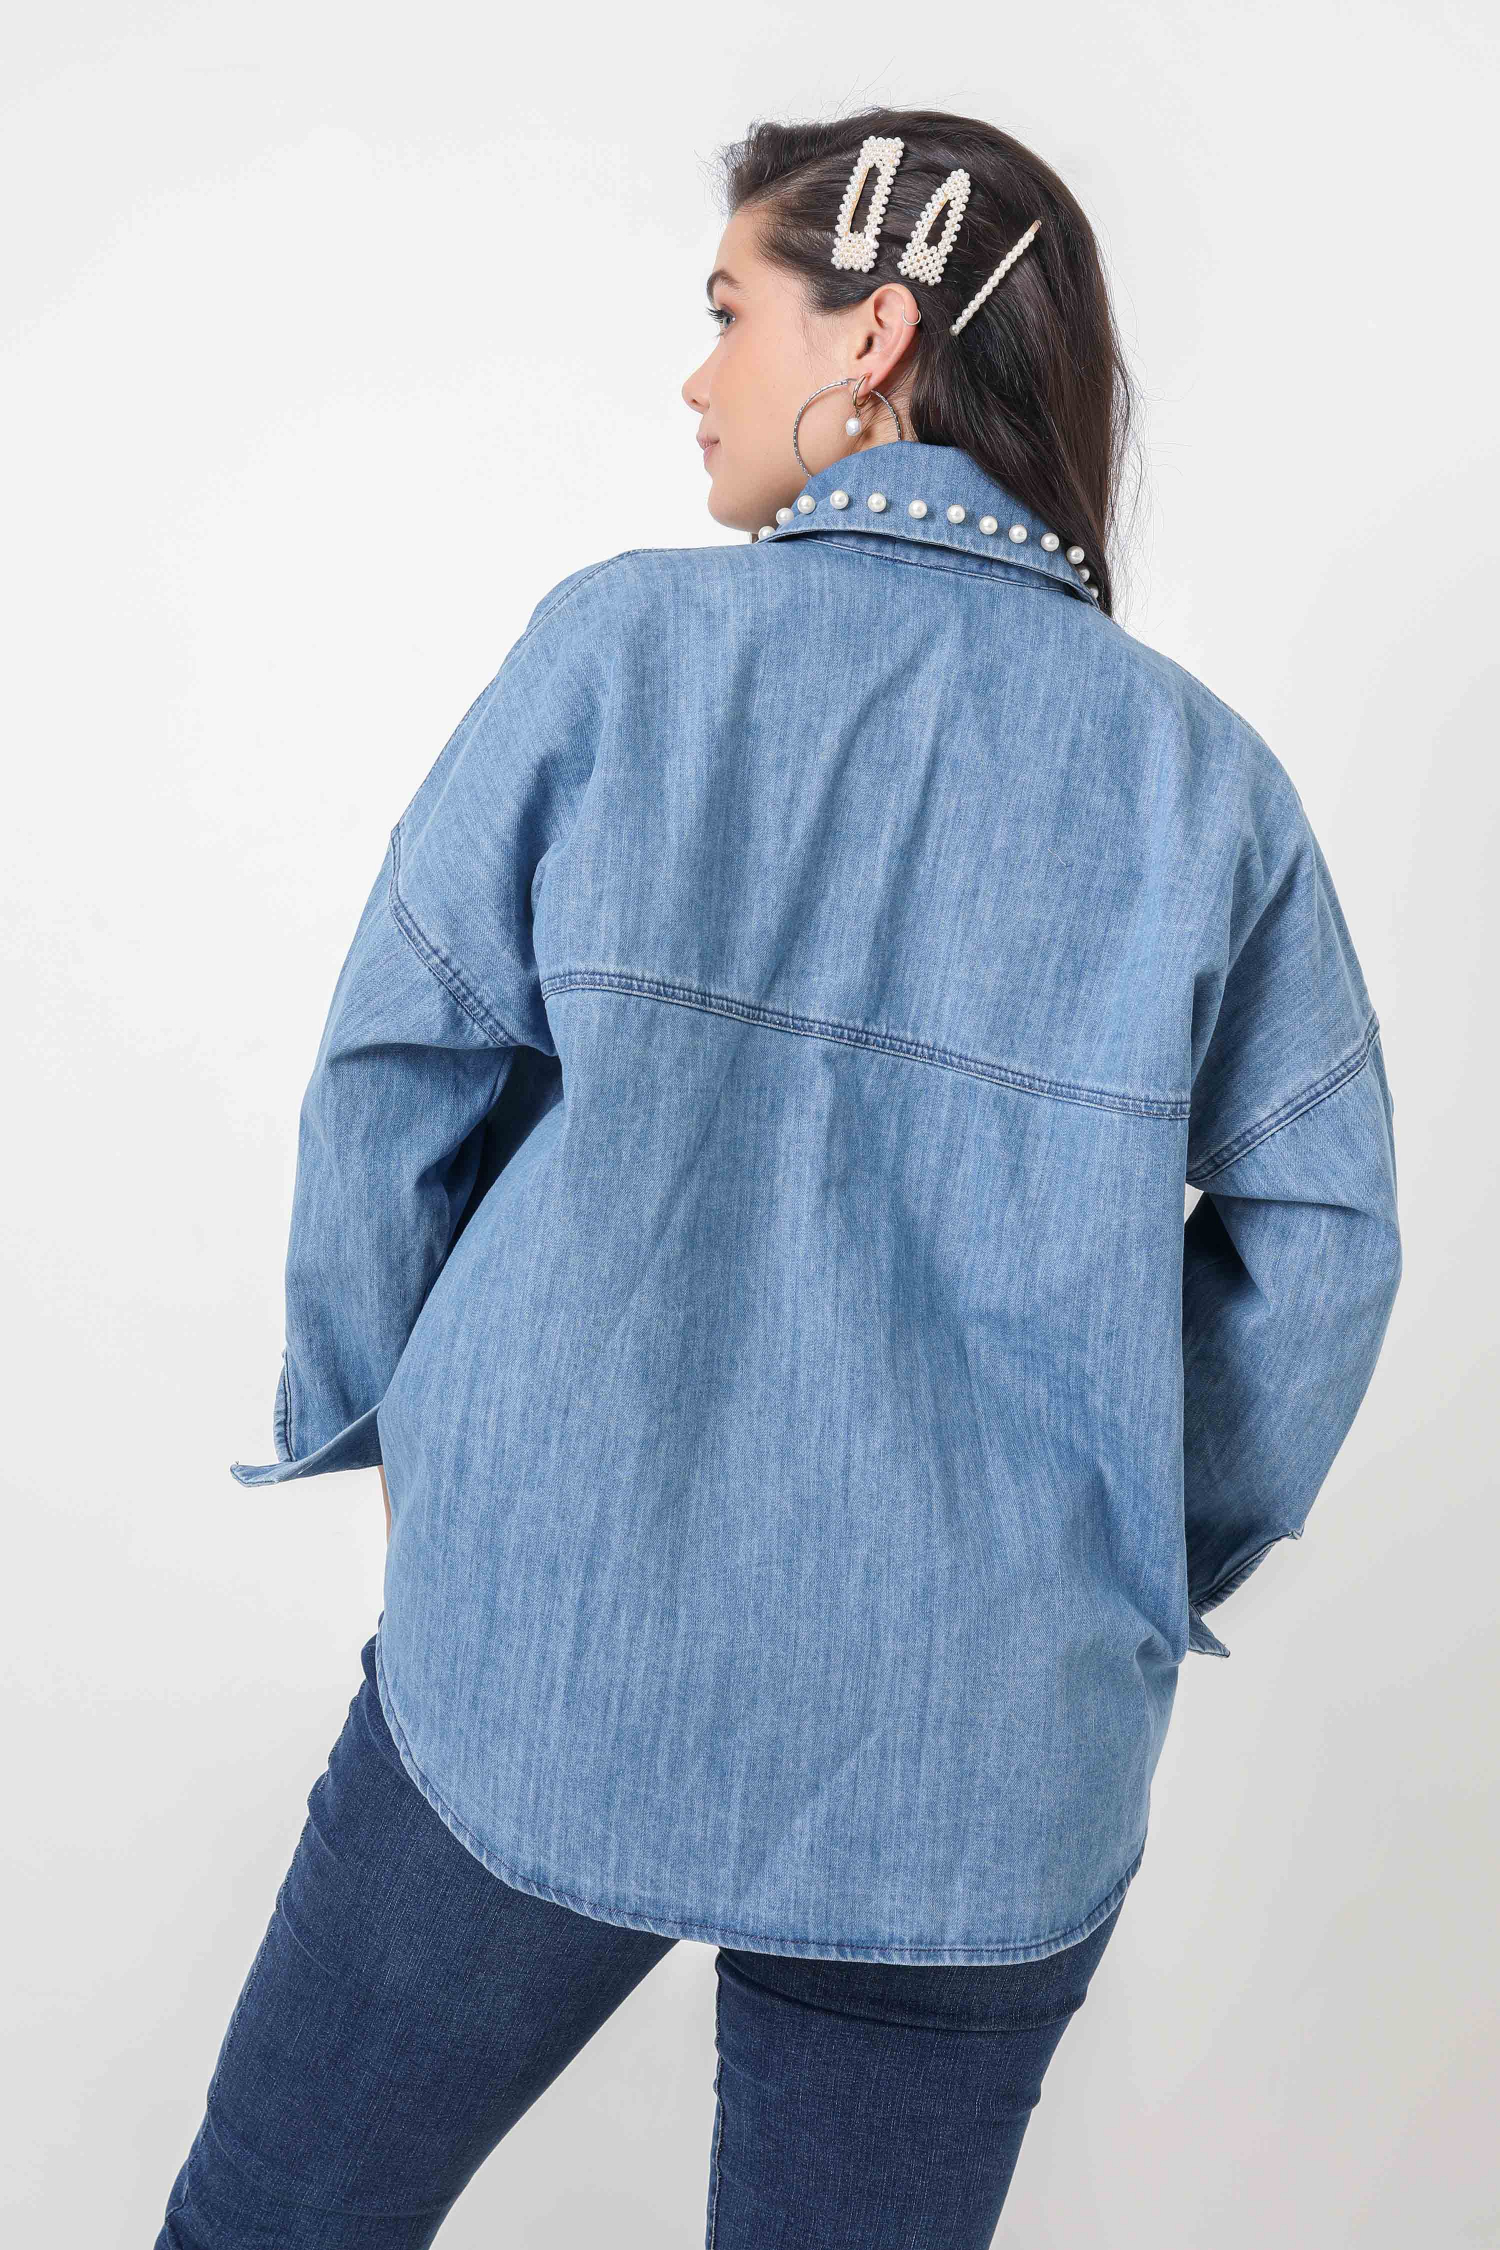 Jeans shirt with decorative pearl.